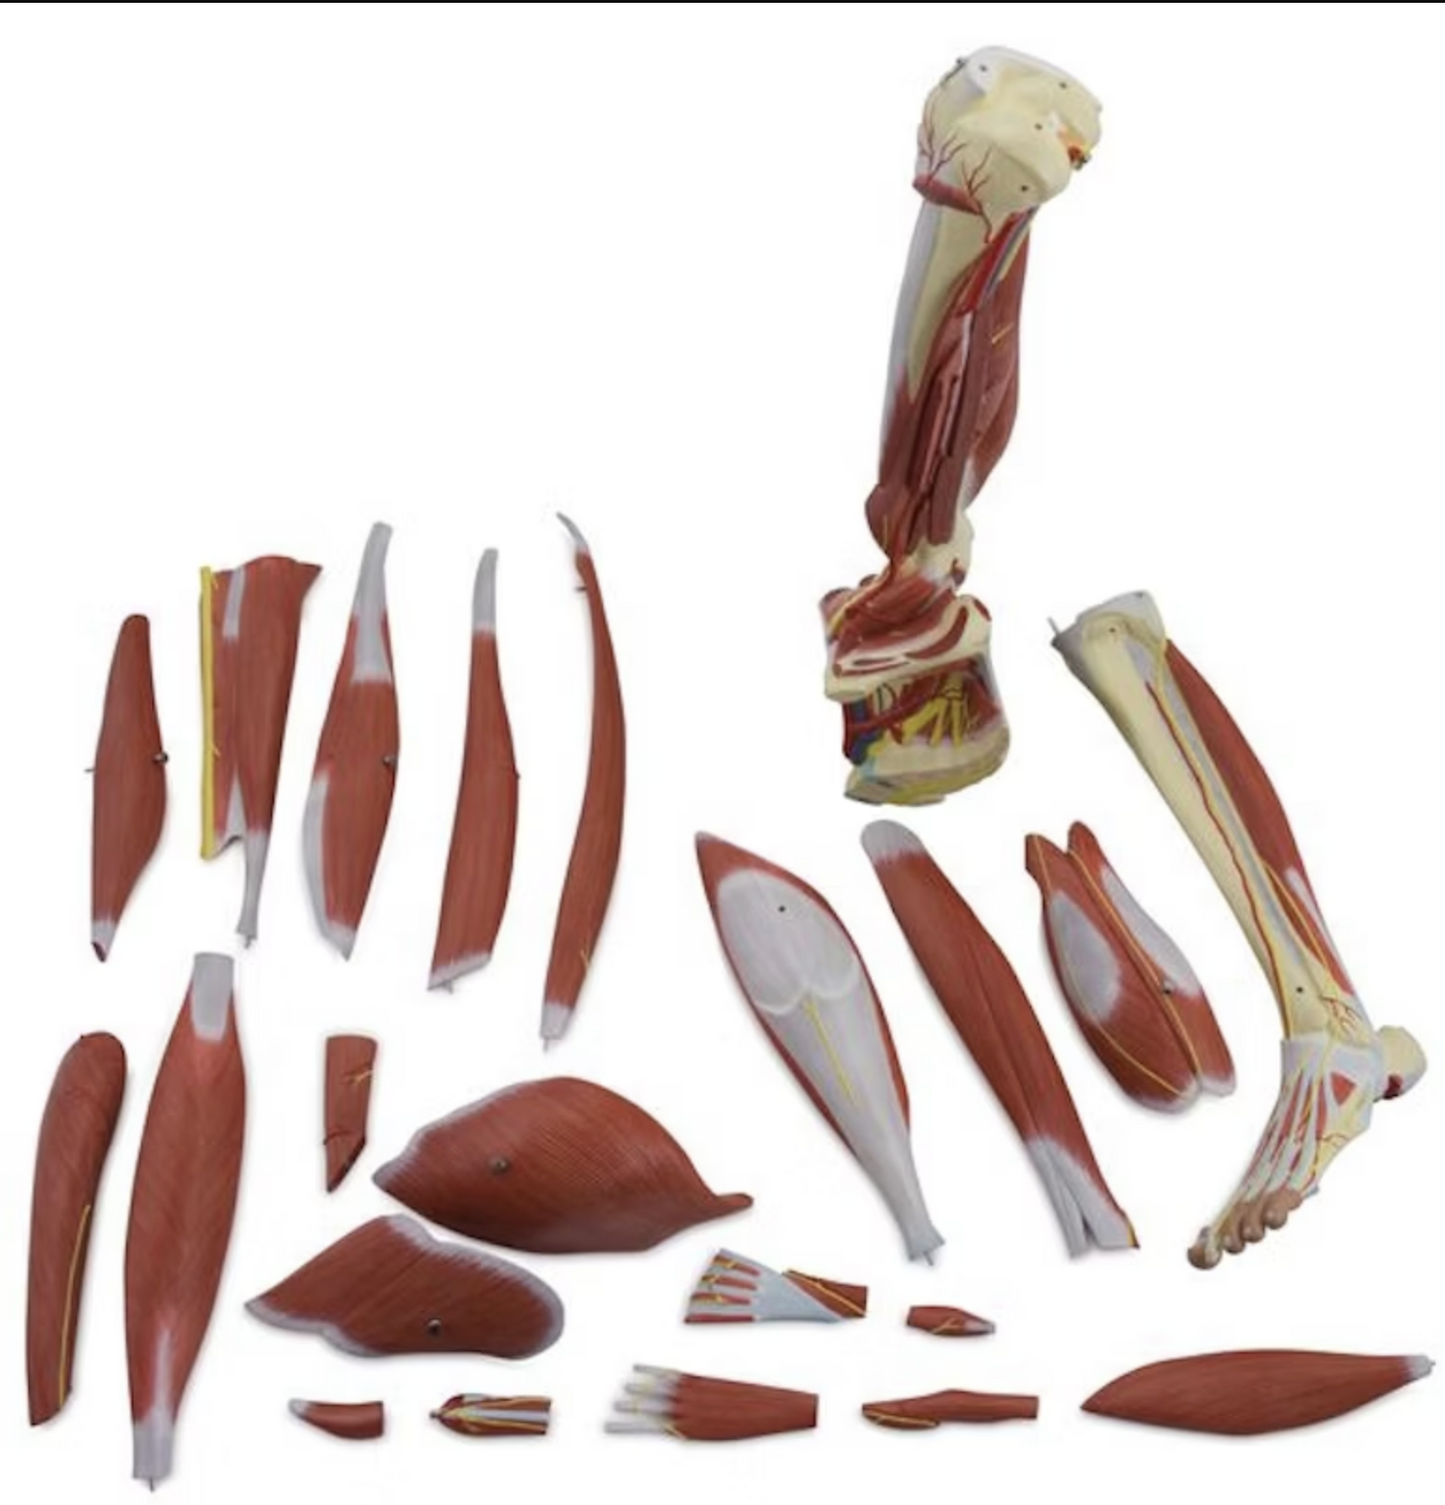 Anatomical model of the leg's musculature, vessels and nerves in 23 parts